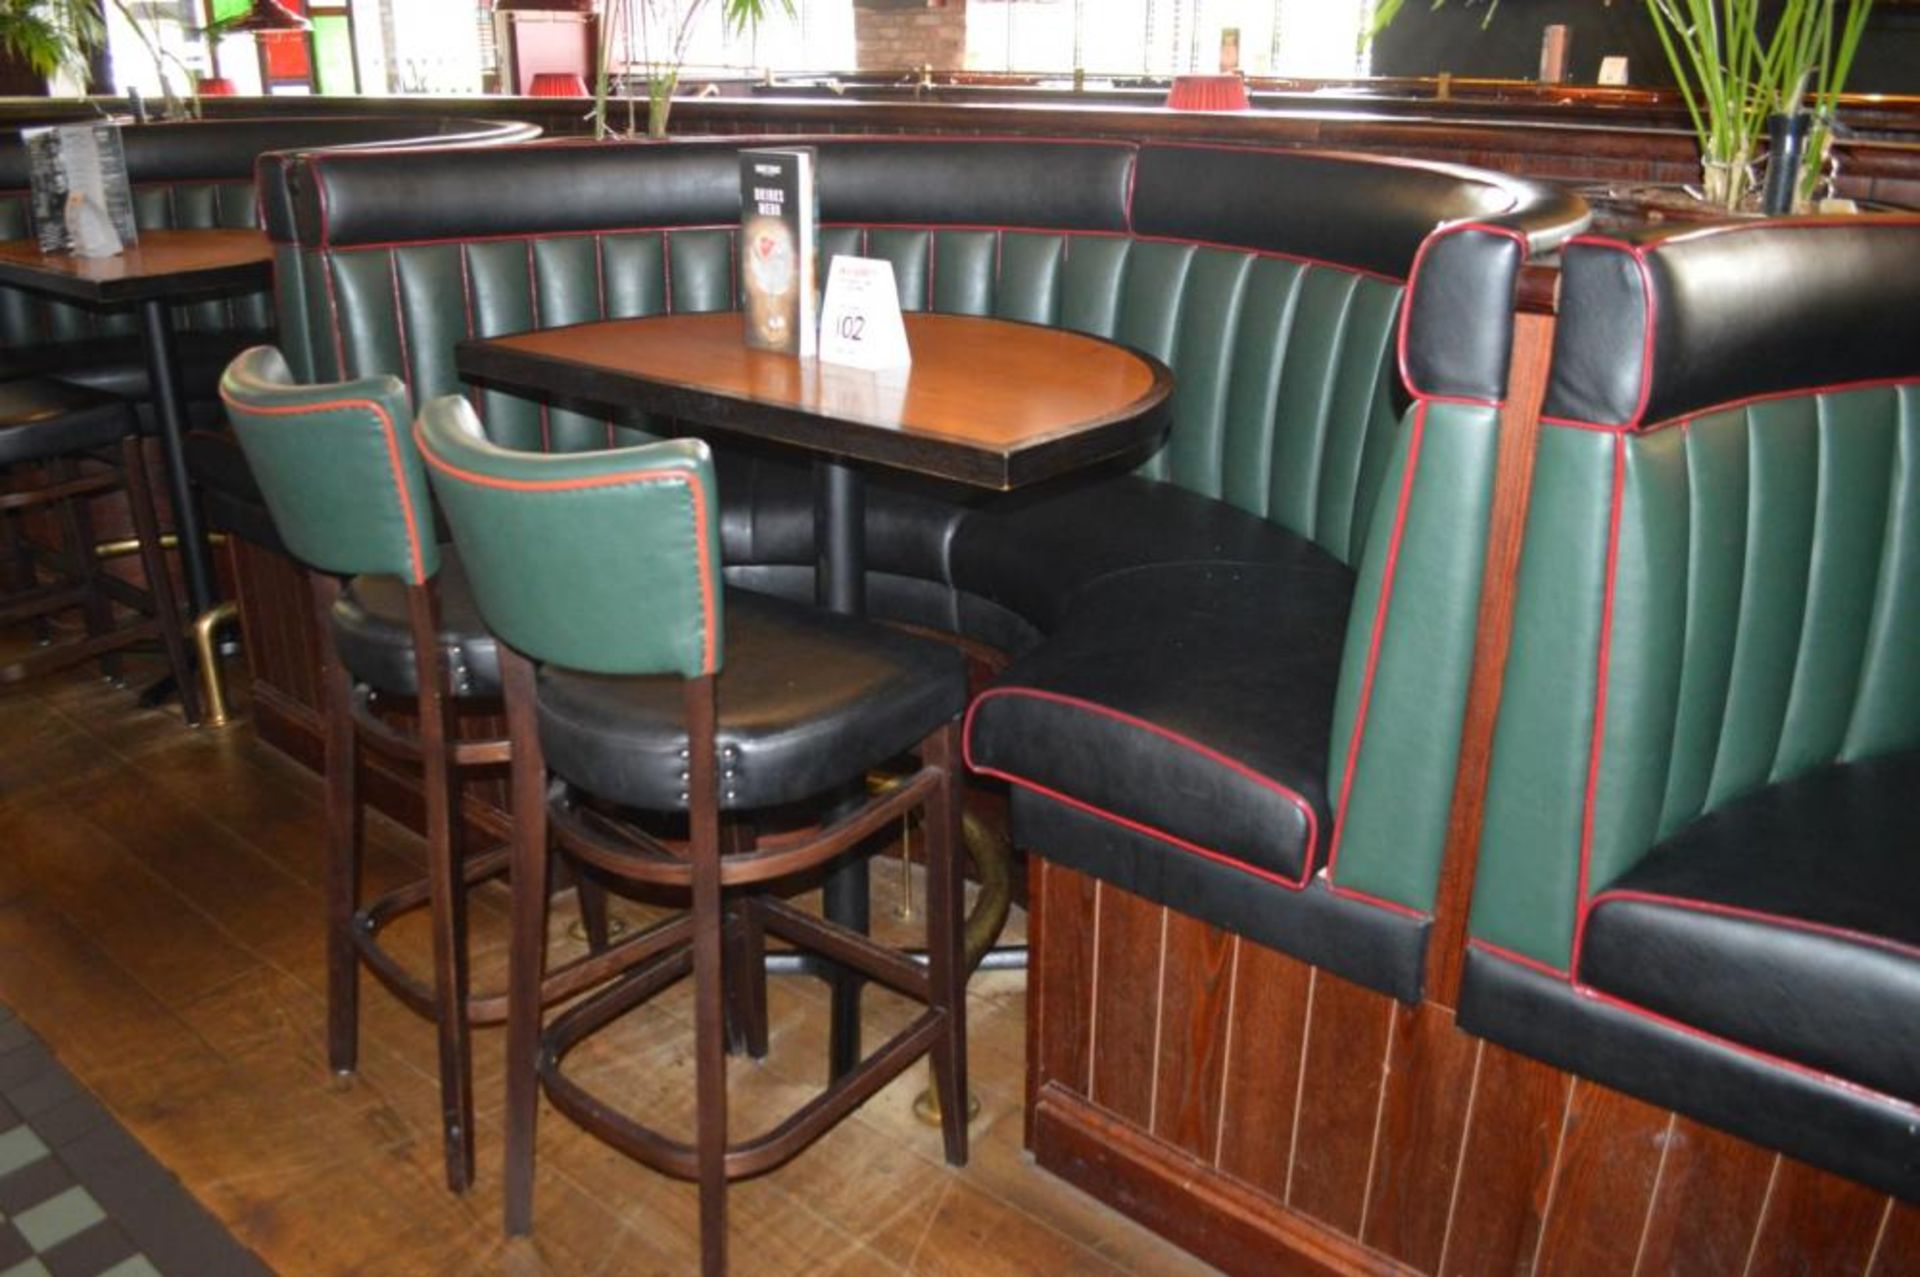 5 x Contemporary Half Circle High Seat Booths - Features a Leather Upholstery in Green and Black, - Image 10 of 11